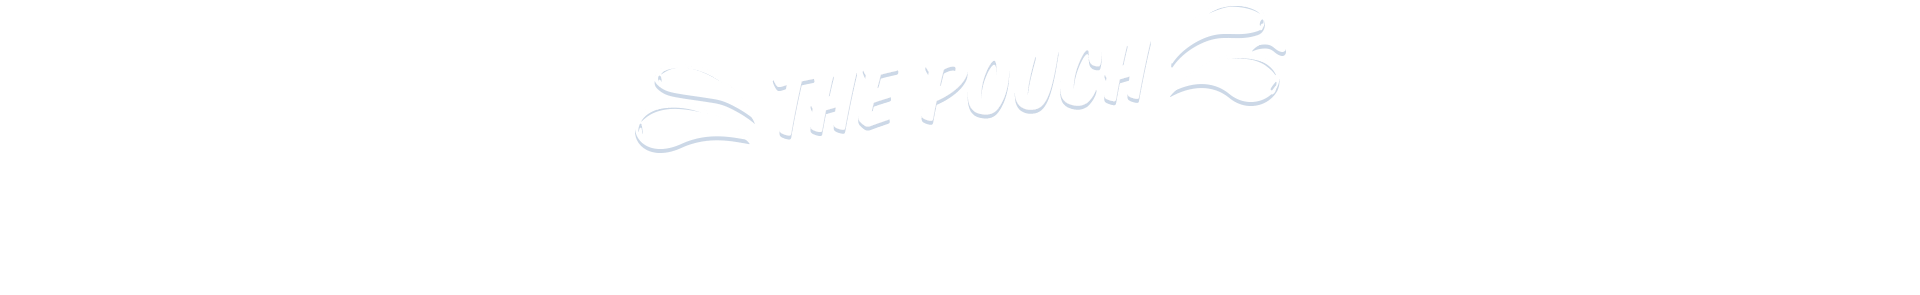 the-pouch